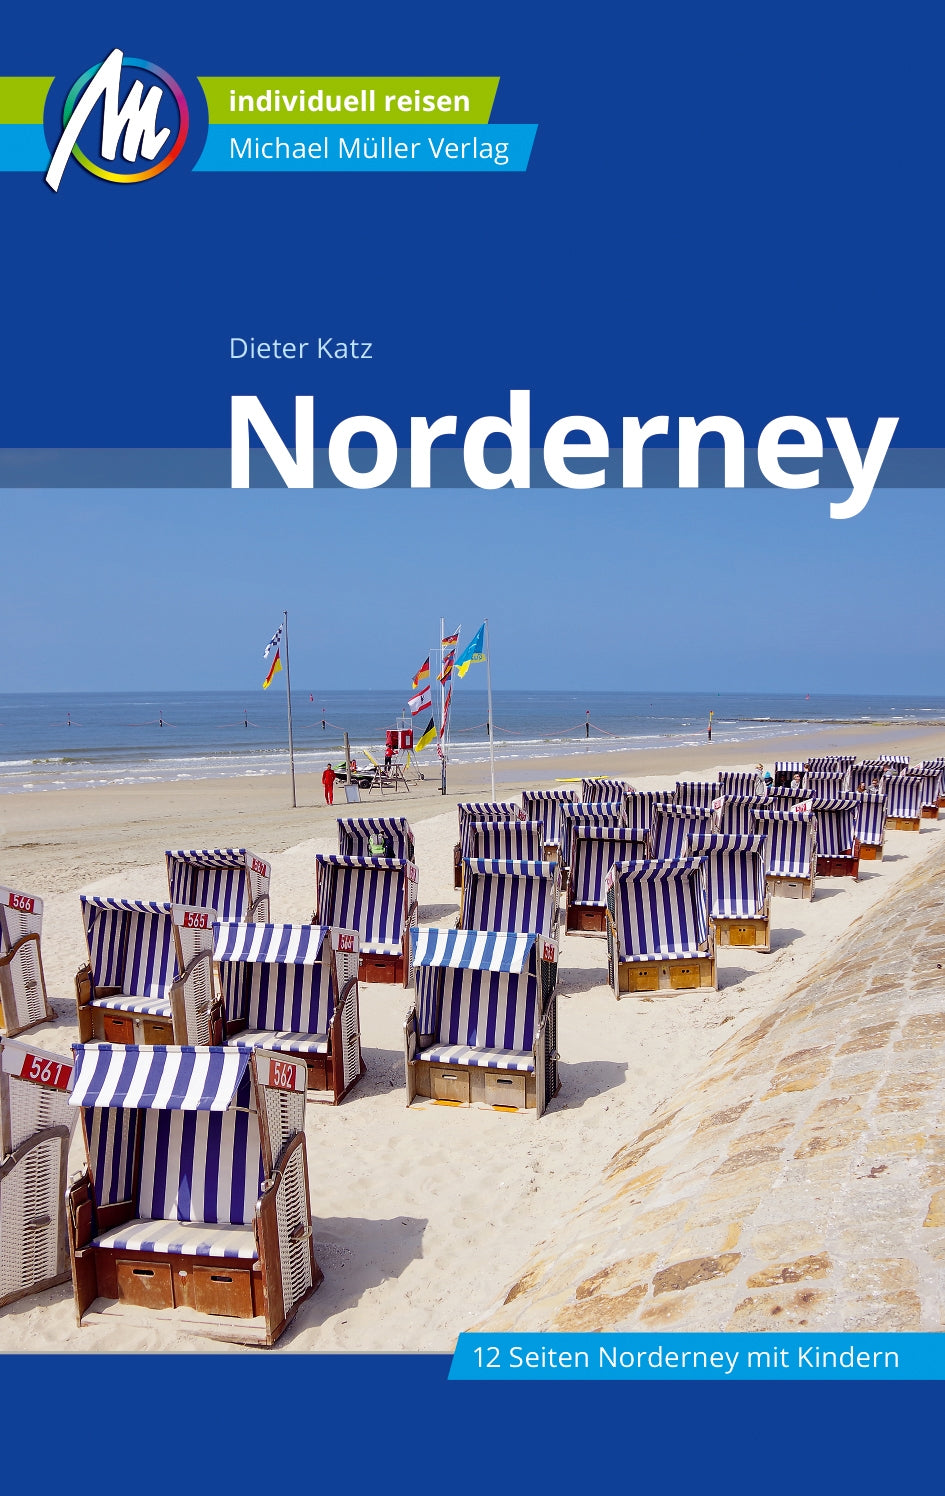 Travel guide Norderney 3.A 2019